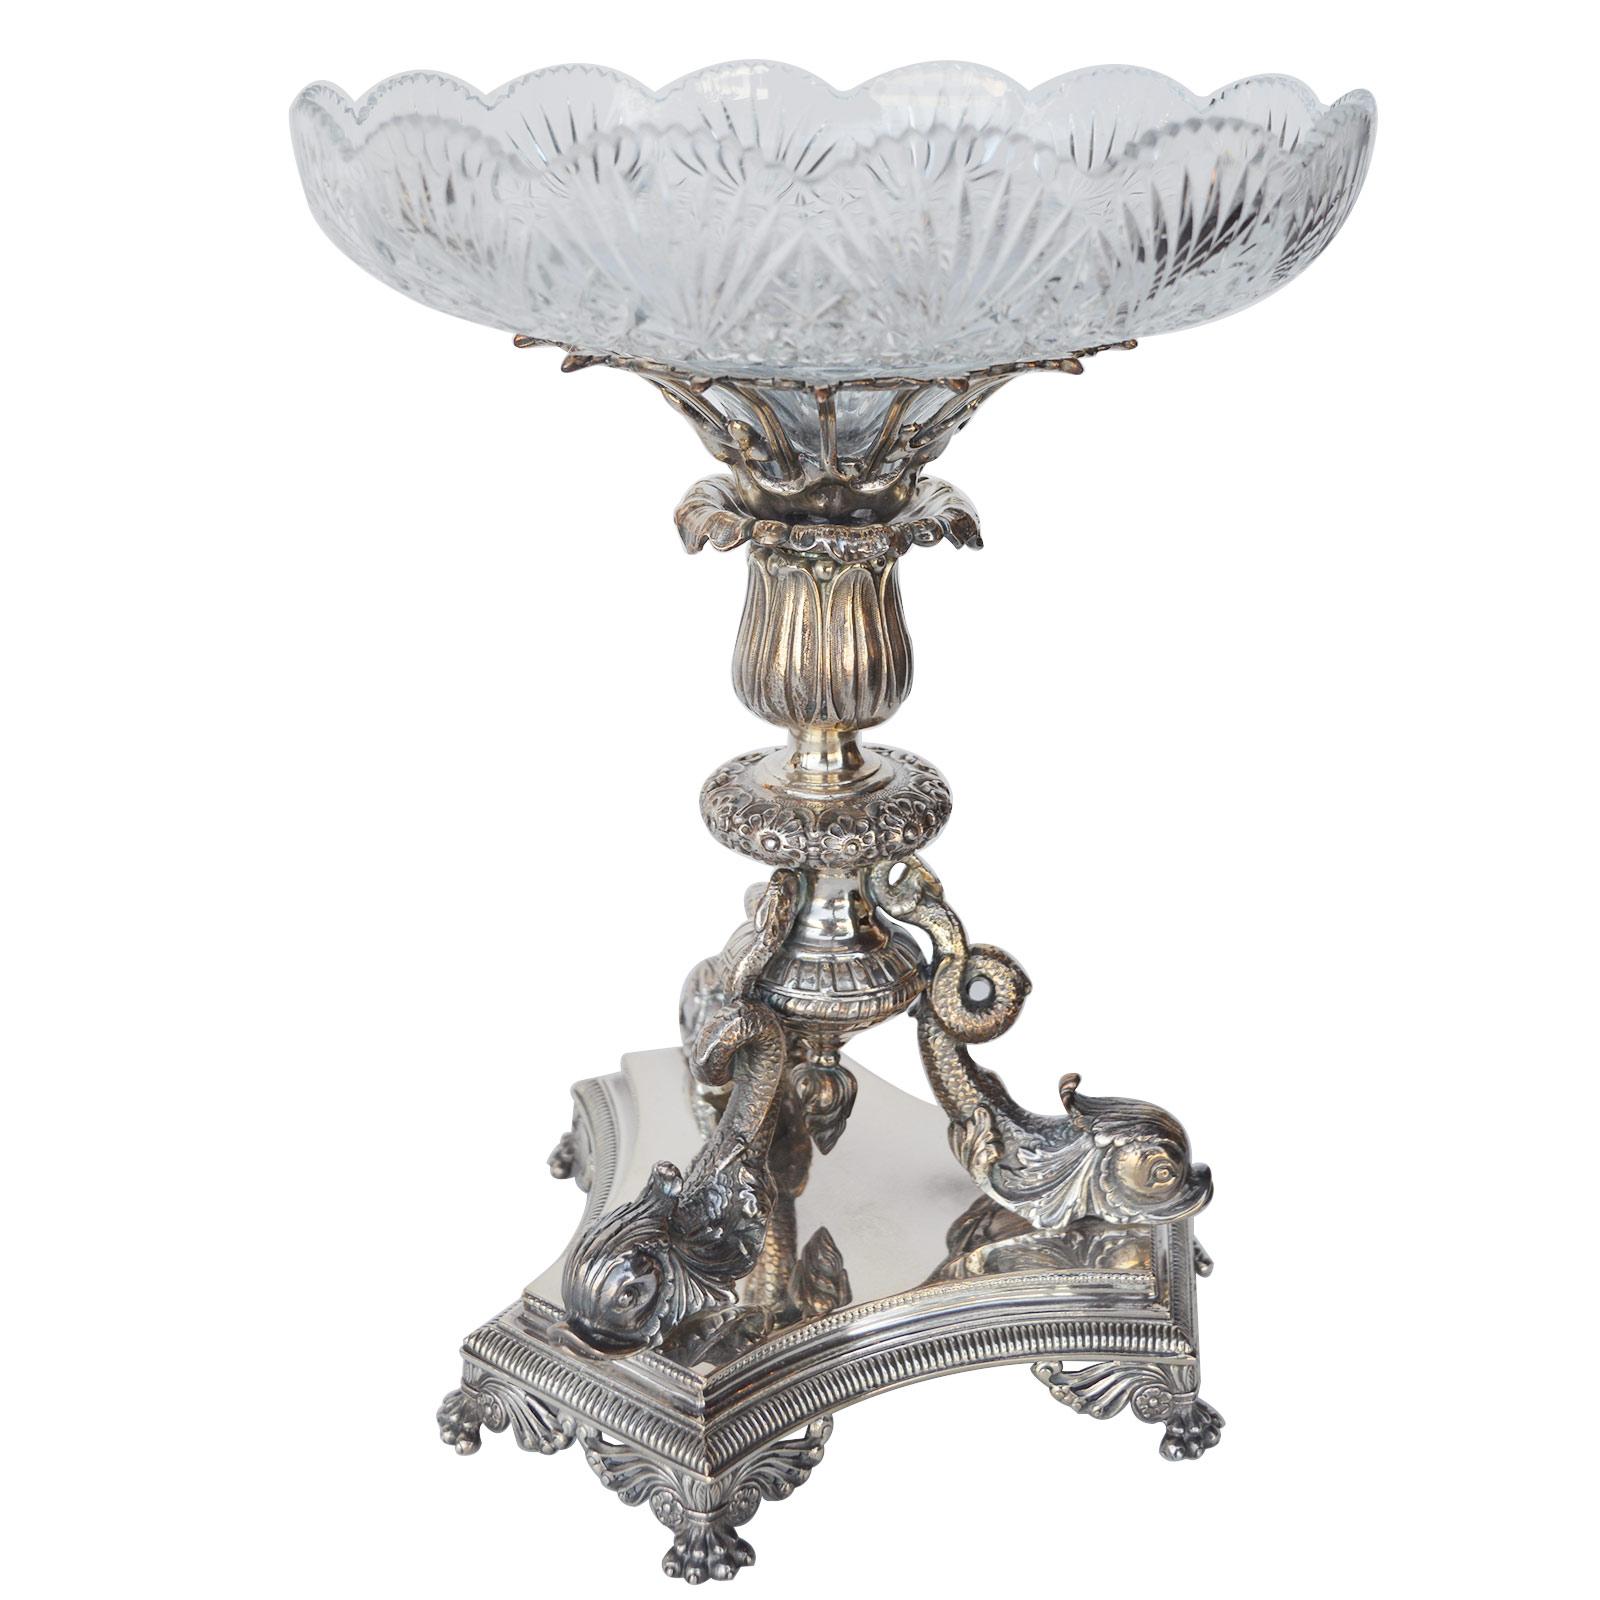 Center Table Silver & Cut Crystal Set, Late 19th Century

Dimensions

20 in H x 18 in W x 7.1 D
12.1 in H x 9 in W x 7.1 D
12.1 in H x 9 in W x 7.1 D